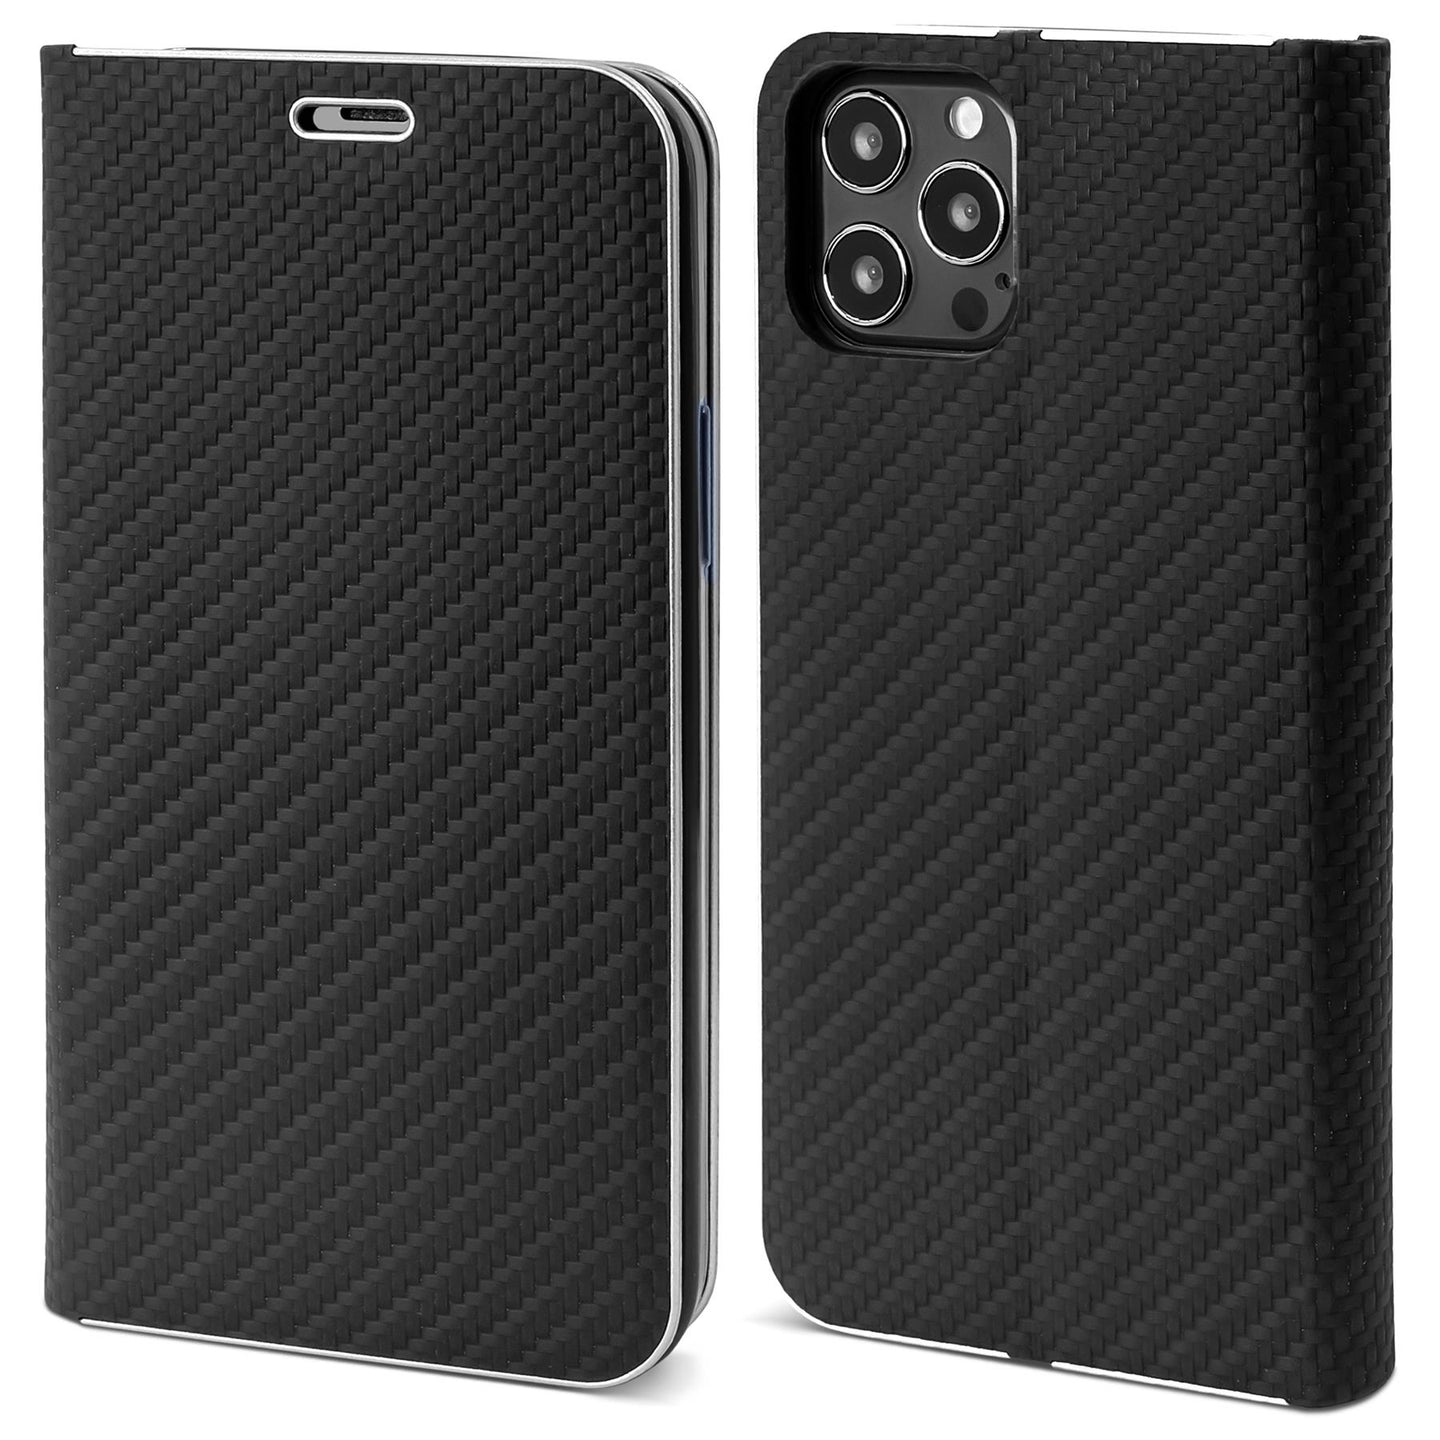 Moozy Wallet Case for iPhone 13 Pro, Black Carbon – Flip Case with Metallic Border Design Magnetic Closure Flip Cover with Card Holder